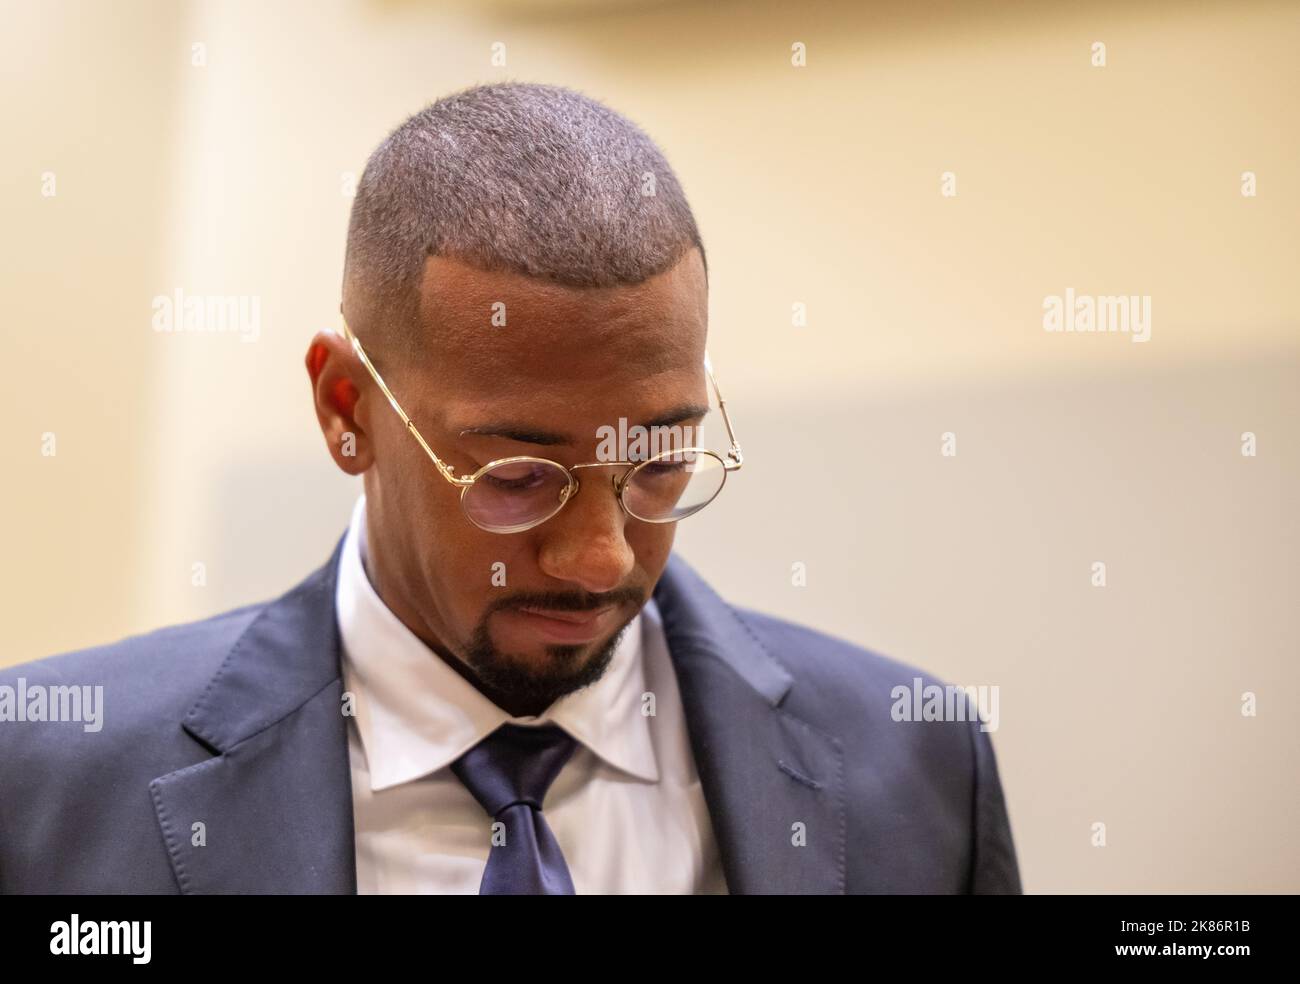 Munich, Germany. 21st Oct, 2022. Professional footballer and former national team player Jerome Boateng is in the courtroom of the Munich I Regional Court at the start of the continuation in the appeal trial. Boateng is accused of beating his ex-girlfriend in 2018 during a joint Caribbean vacation. He was therefore sentenced last year to a fine of 1.8 million euros. He, the public prosecutor's office and his ex-girlfriend as joint plaintiff appealed against this decision of the Munich Local Court. Credit: Peter Kneffel/dpa/Alamy Live News Stock Photo